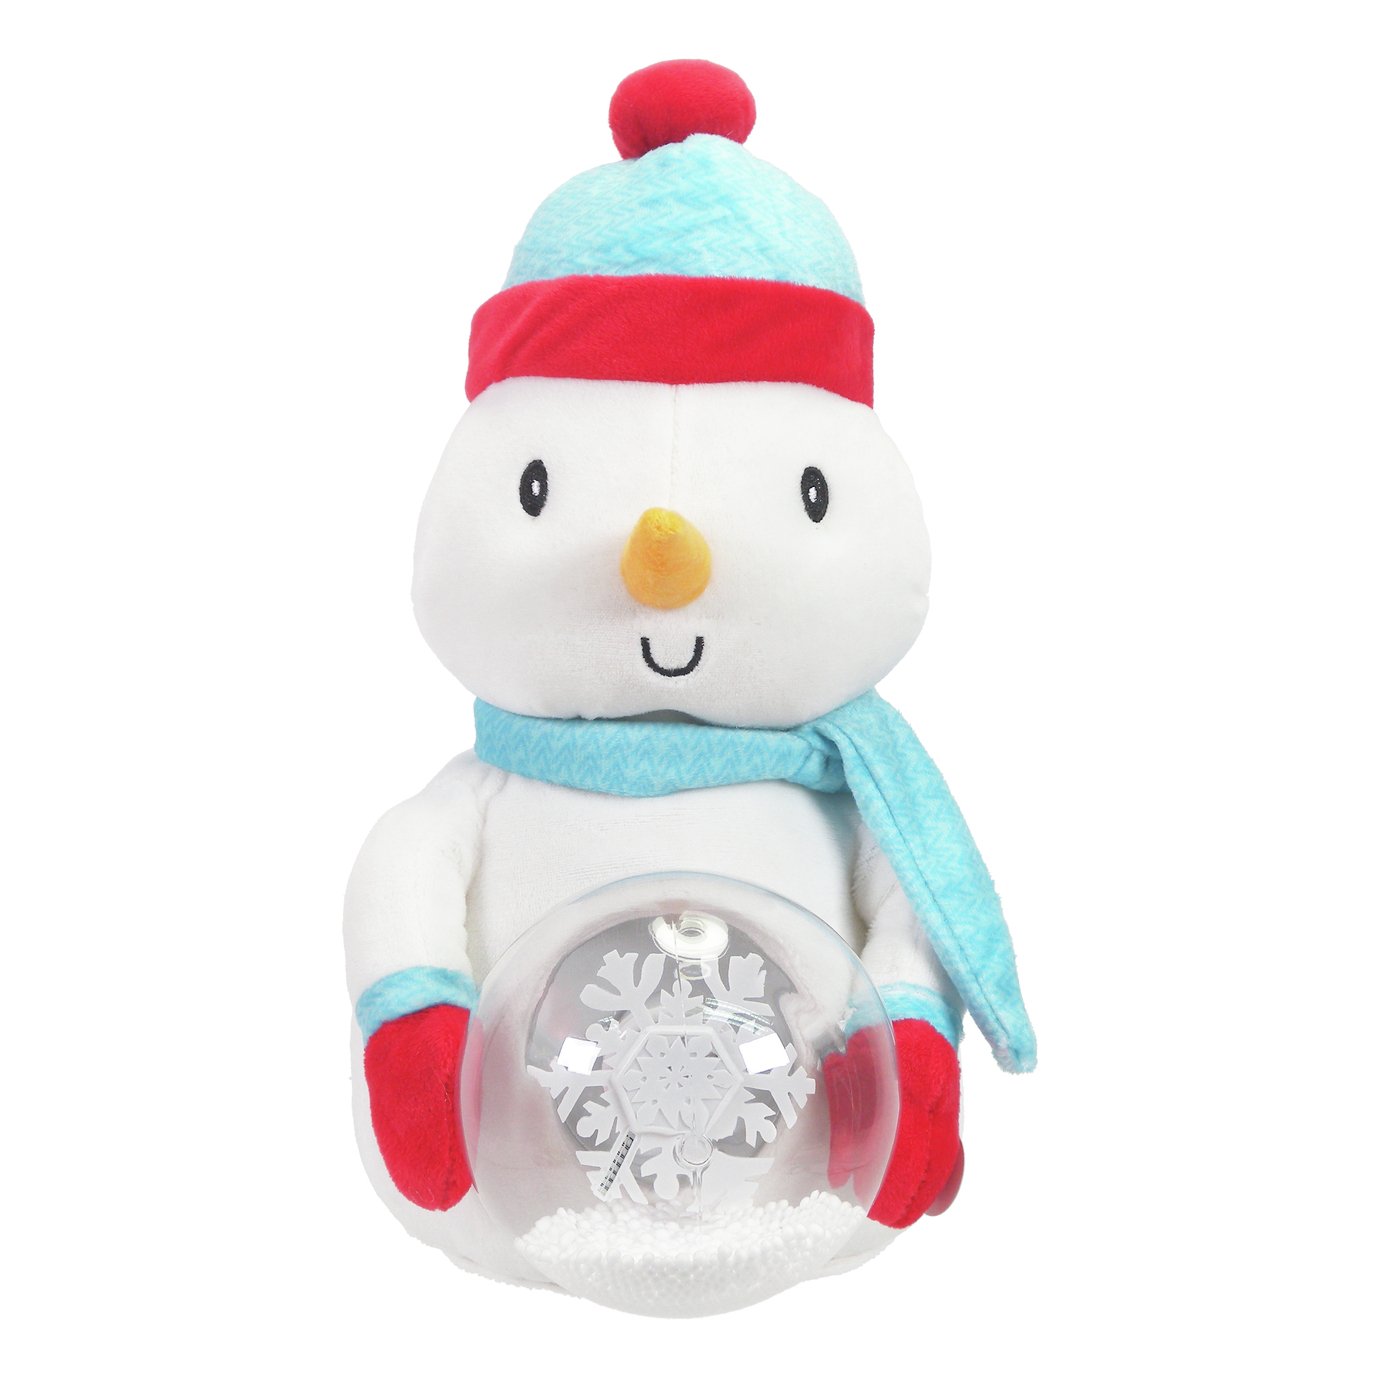 Argos Home Snowman Animated Soft Toy